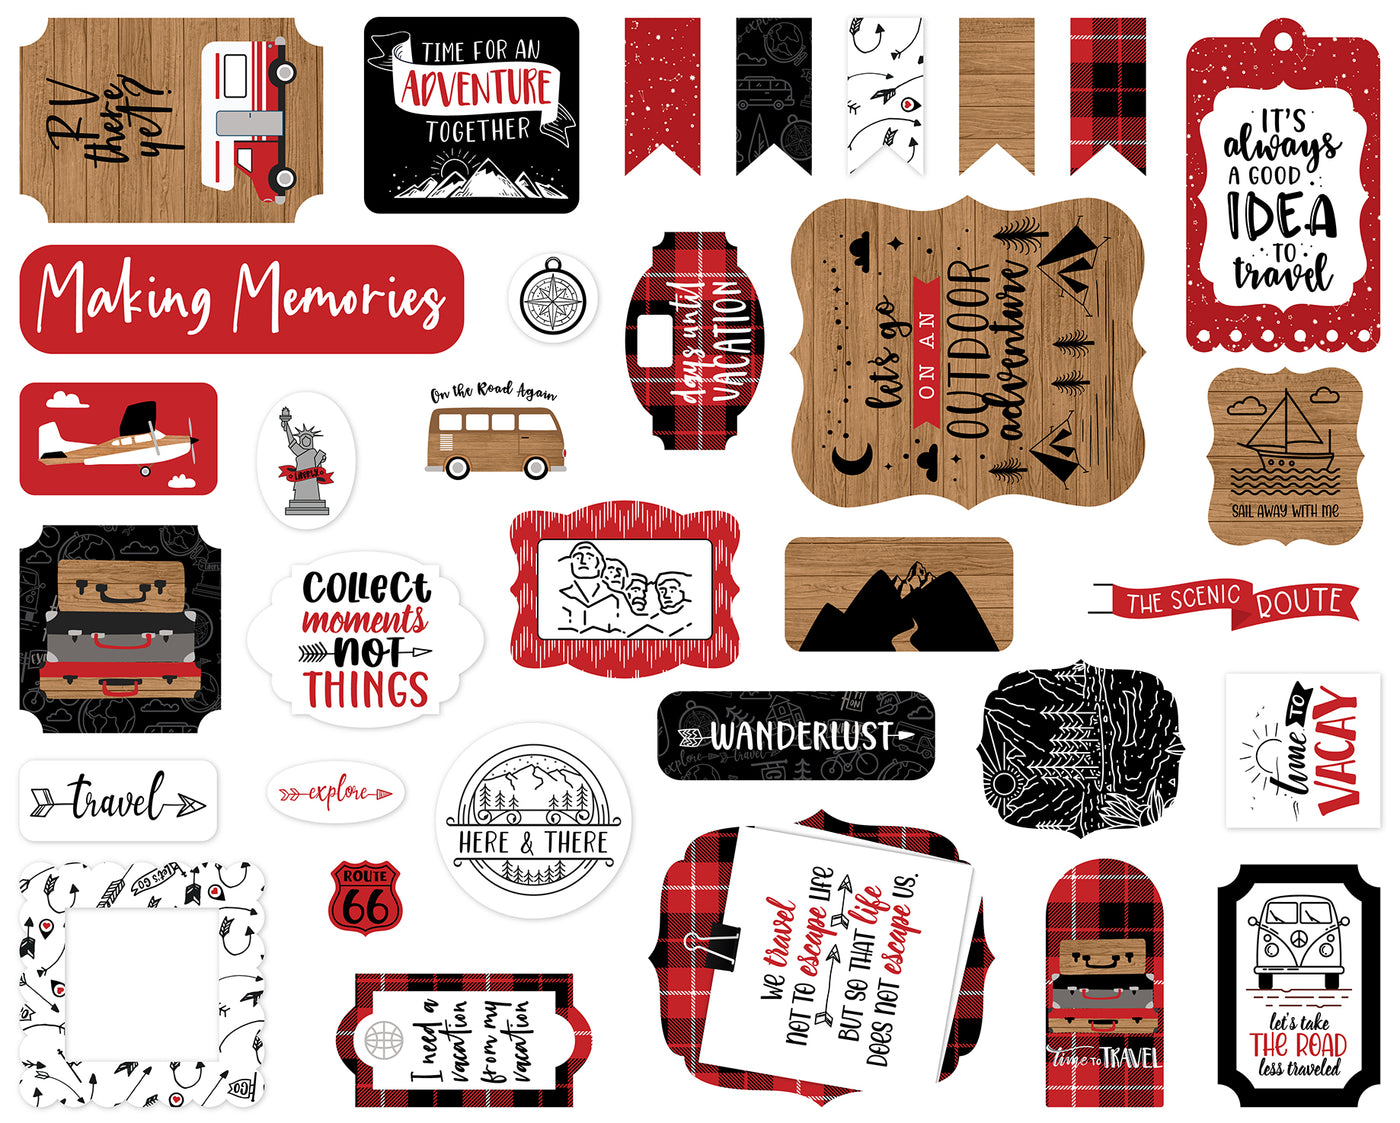 Let's Go Anywhere Ephemera Die Cut Cardstock Pack.  Pack includes 33 different die-cut shapes ready to embellish any project.